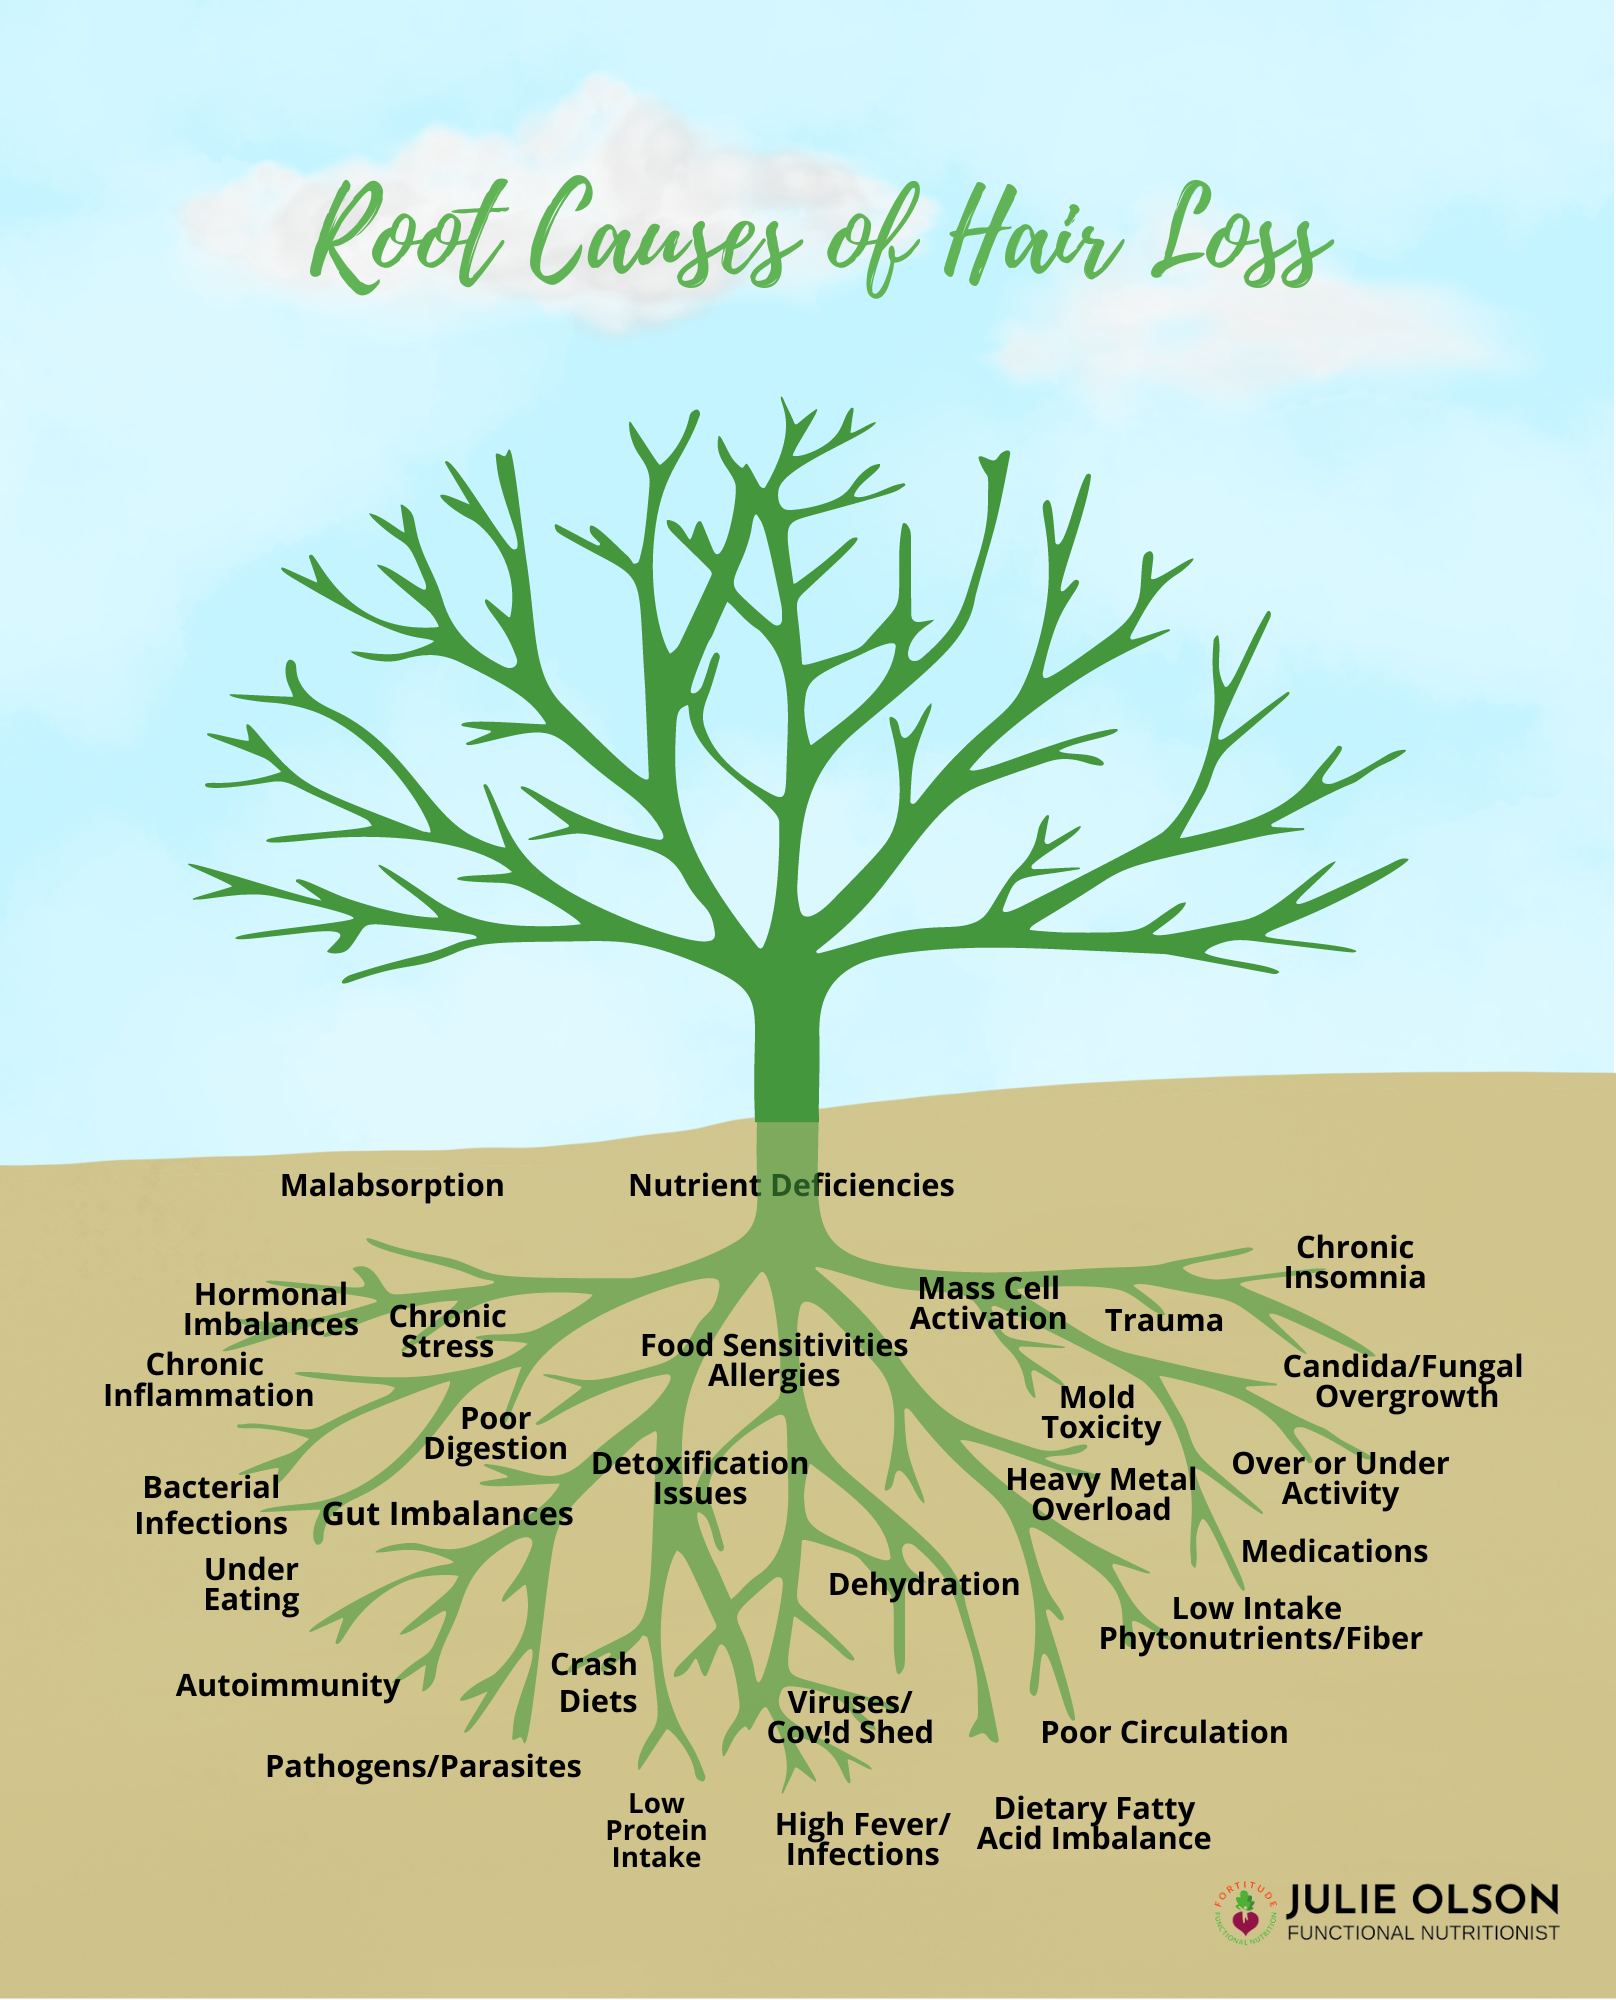 Underlying root causes of hair loss